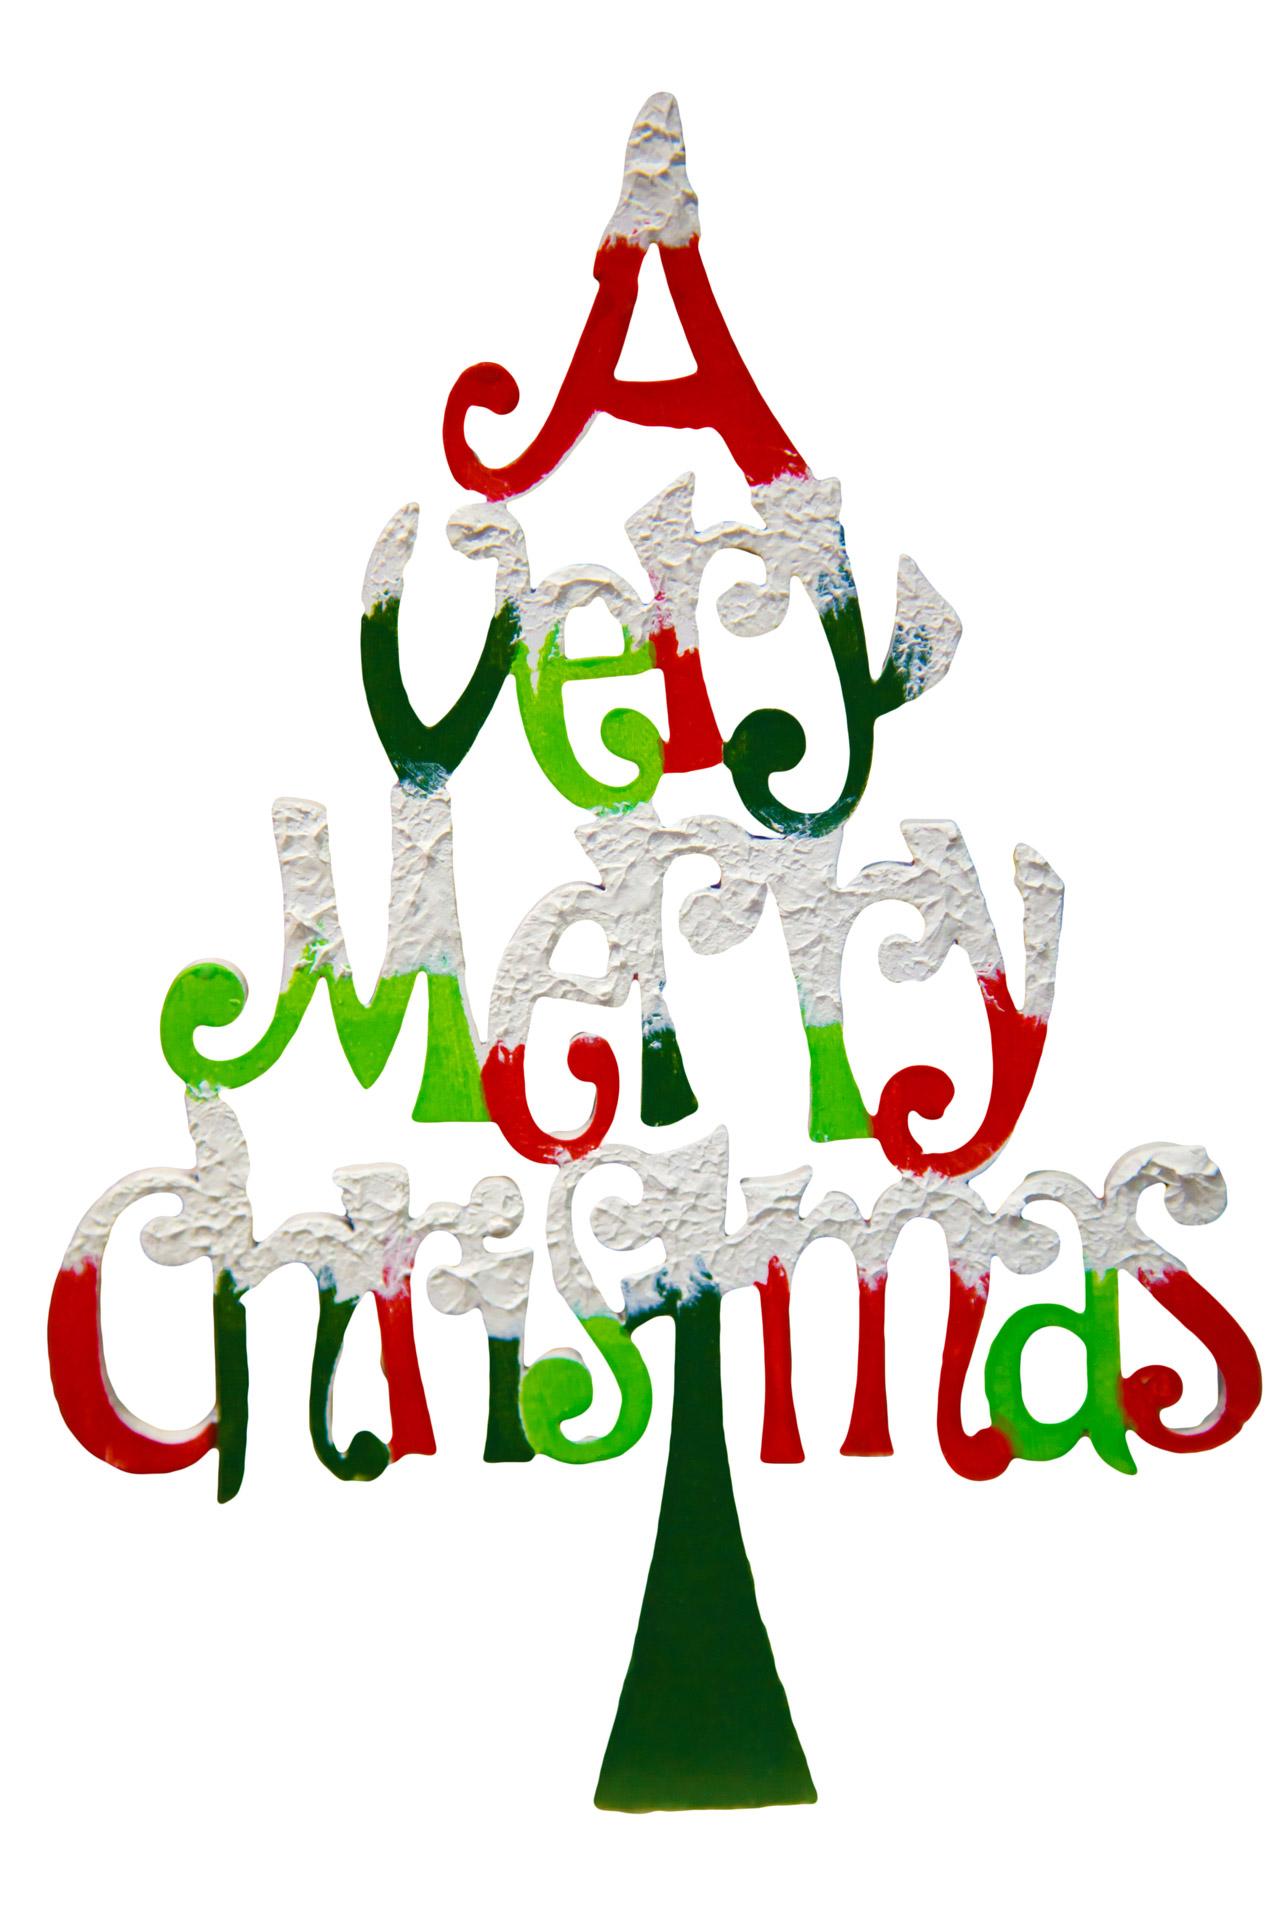 Free Merry Christmas Image, Download Free Clip Art, Free